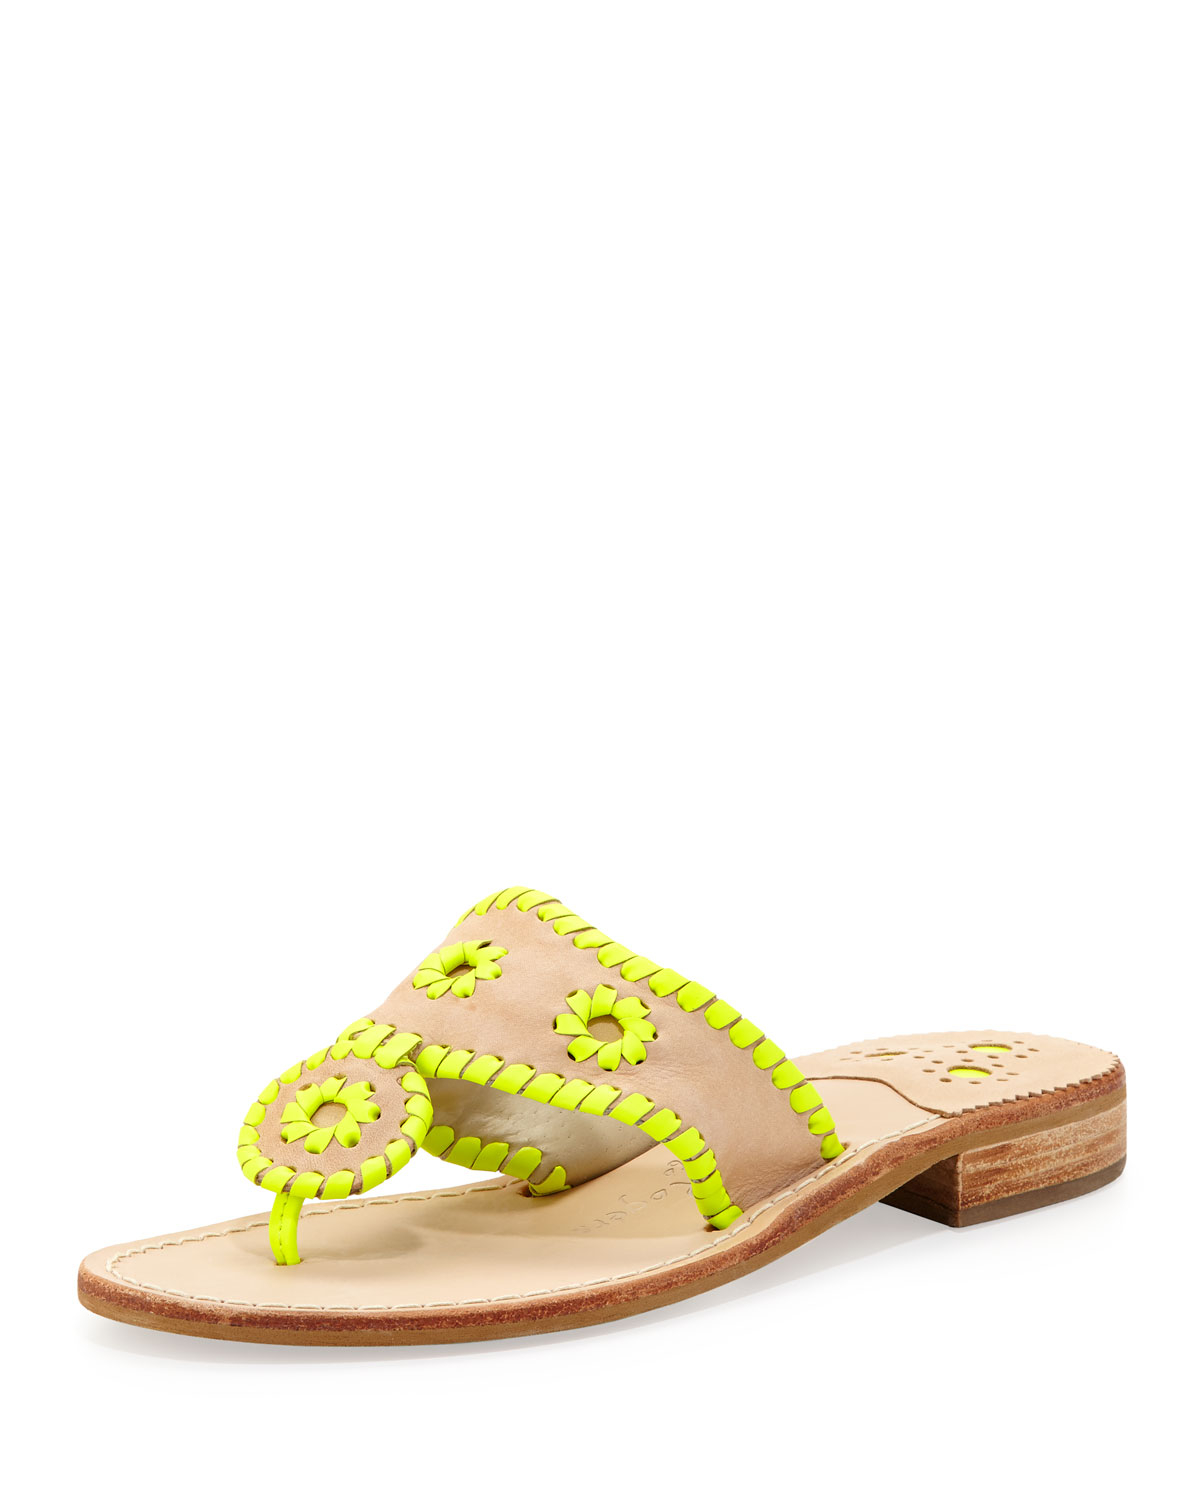 Jack rogers Neon Whipstitch Thong Sandal Lemon in Yellow | Lyst